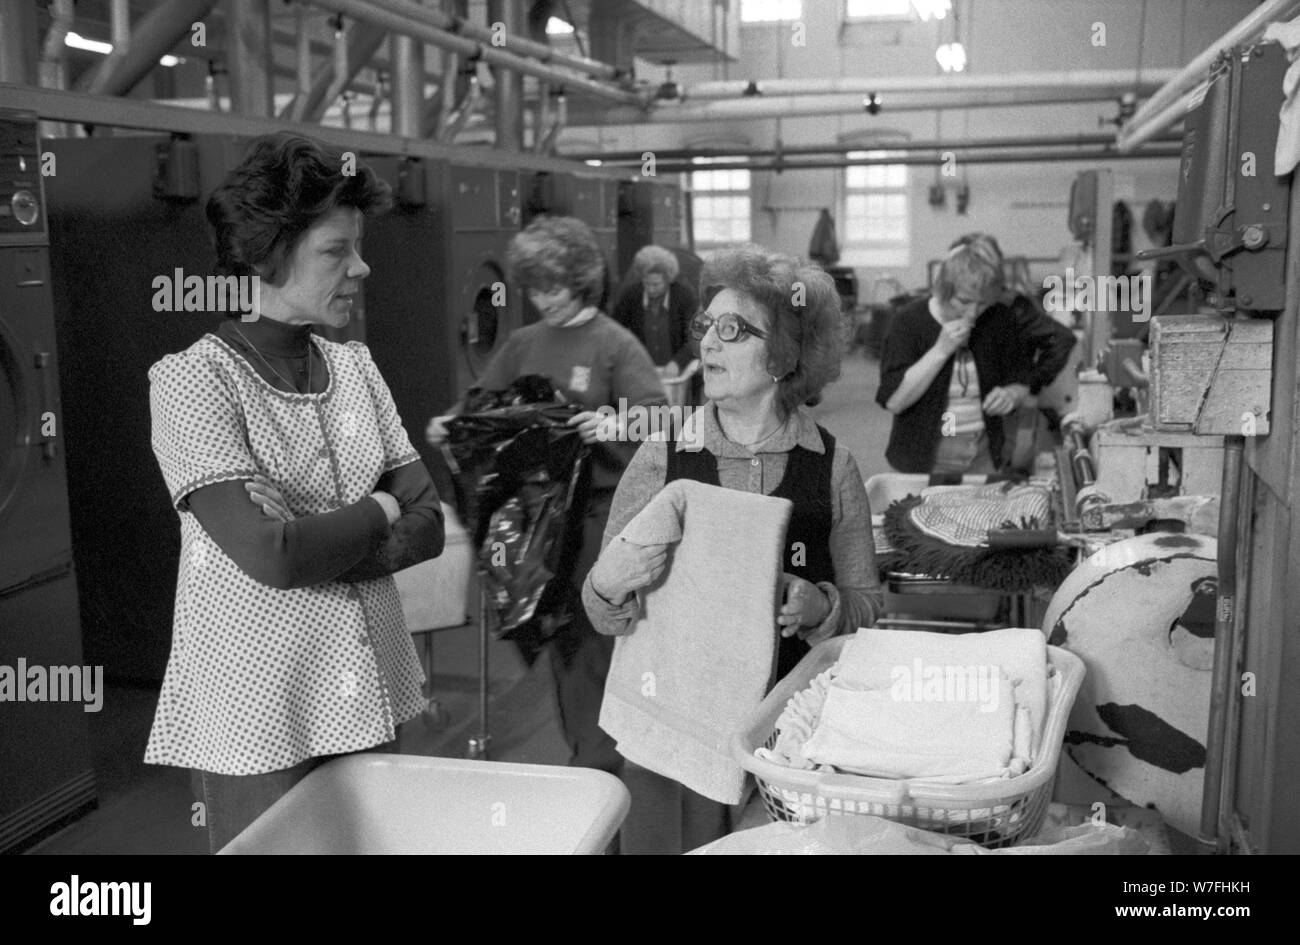 Public Laundry 1970s UK . Women taking their dirty used clothes to a public laundry to get them washed. Battersea south London 1979 70s Manager chatting with customers. England HOMER SYKES Stock Photo